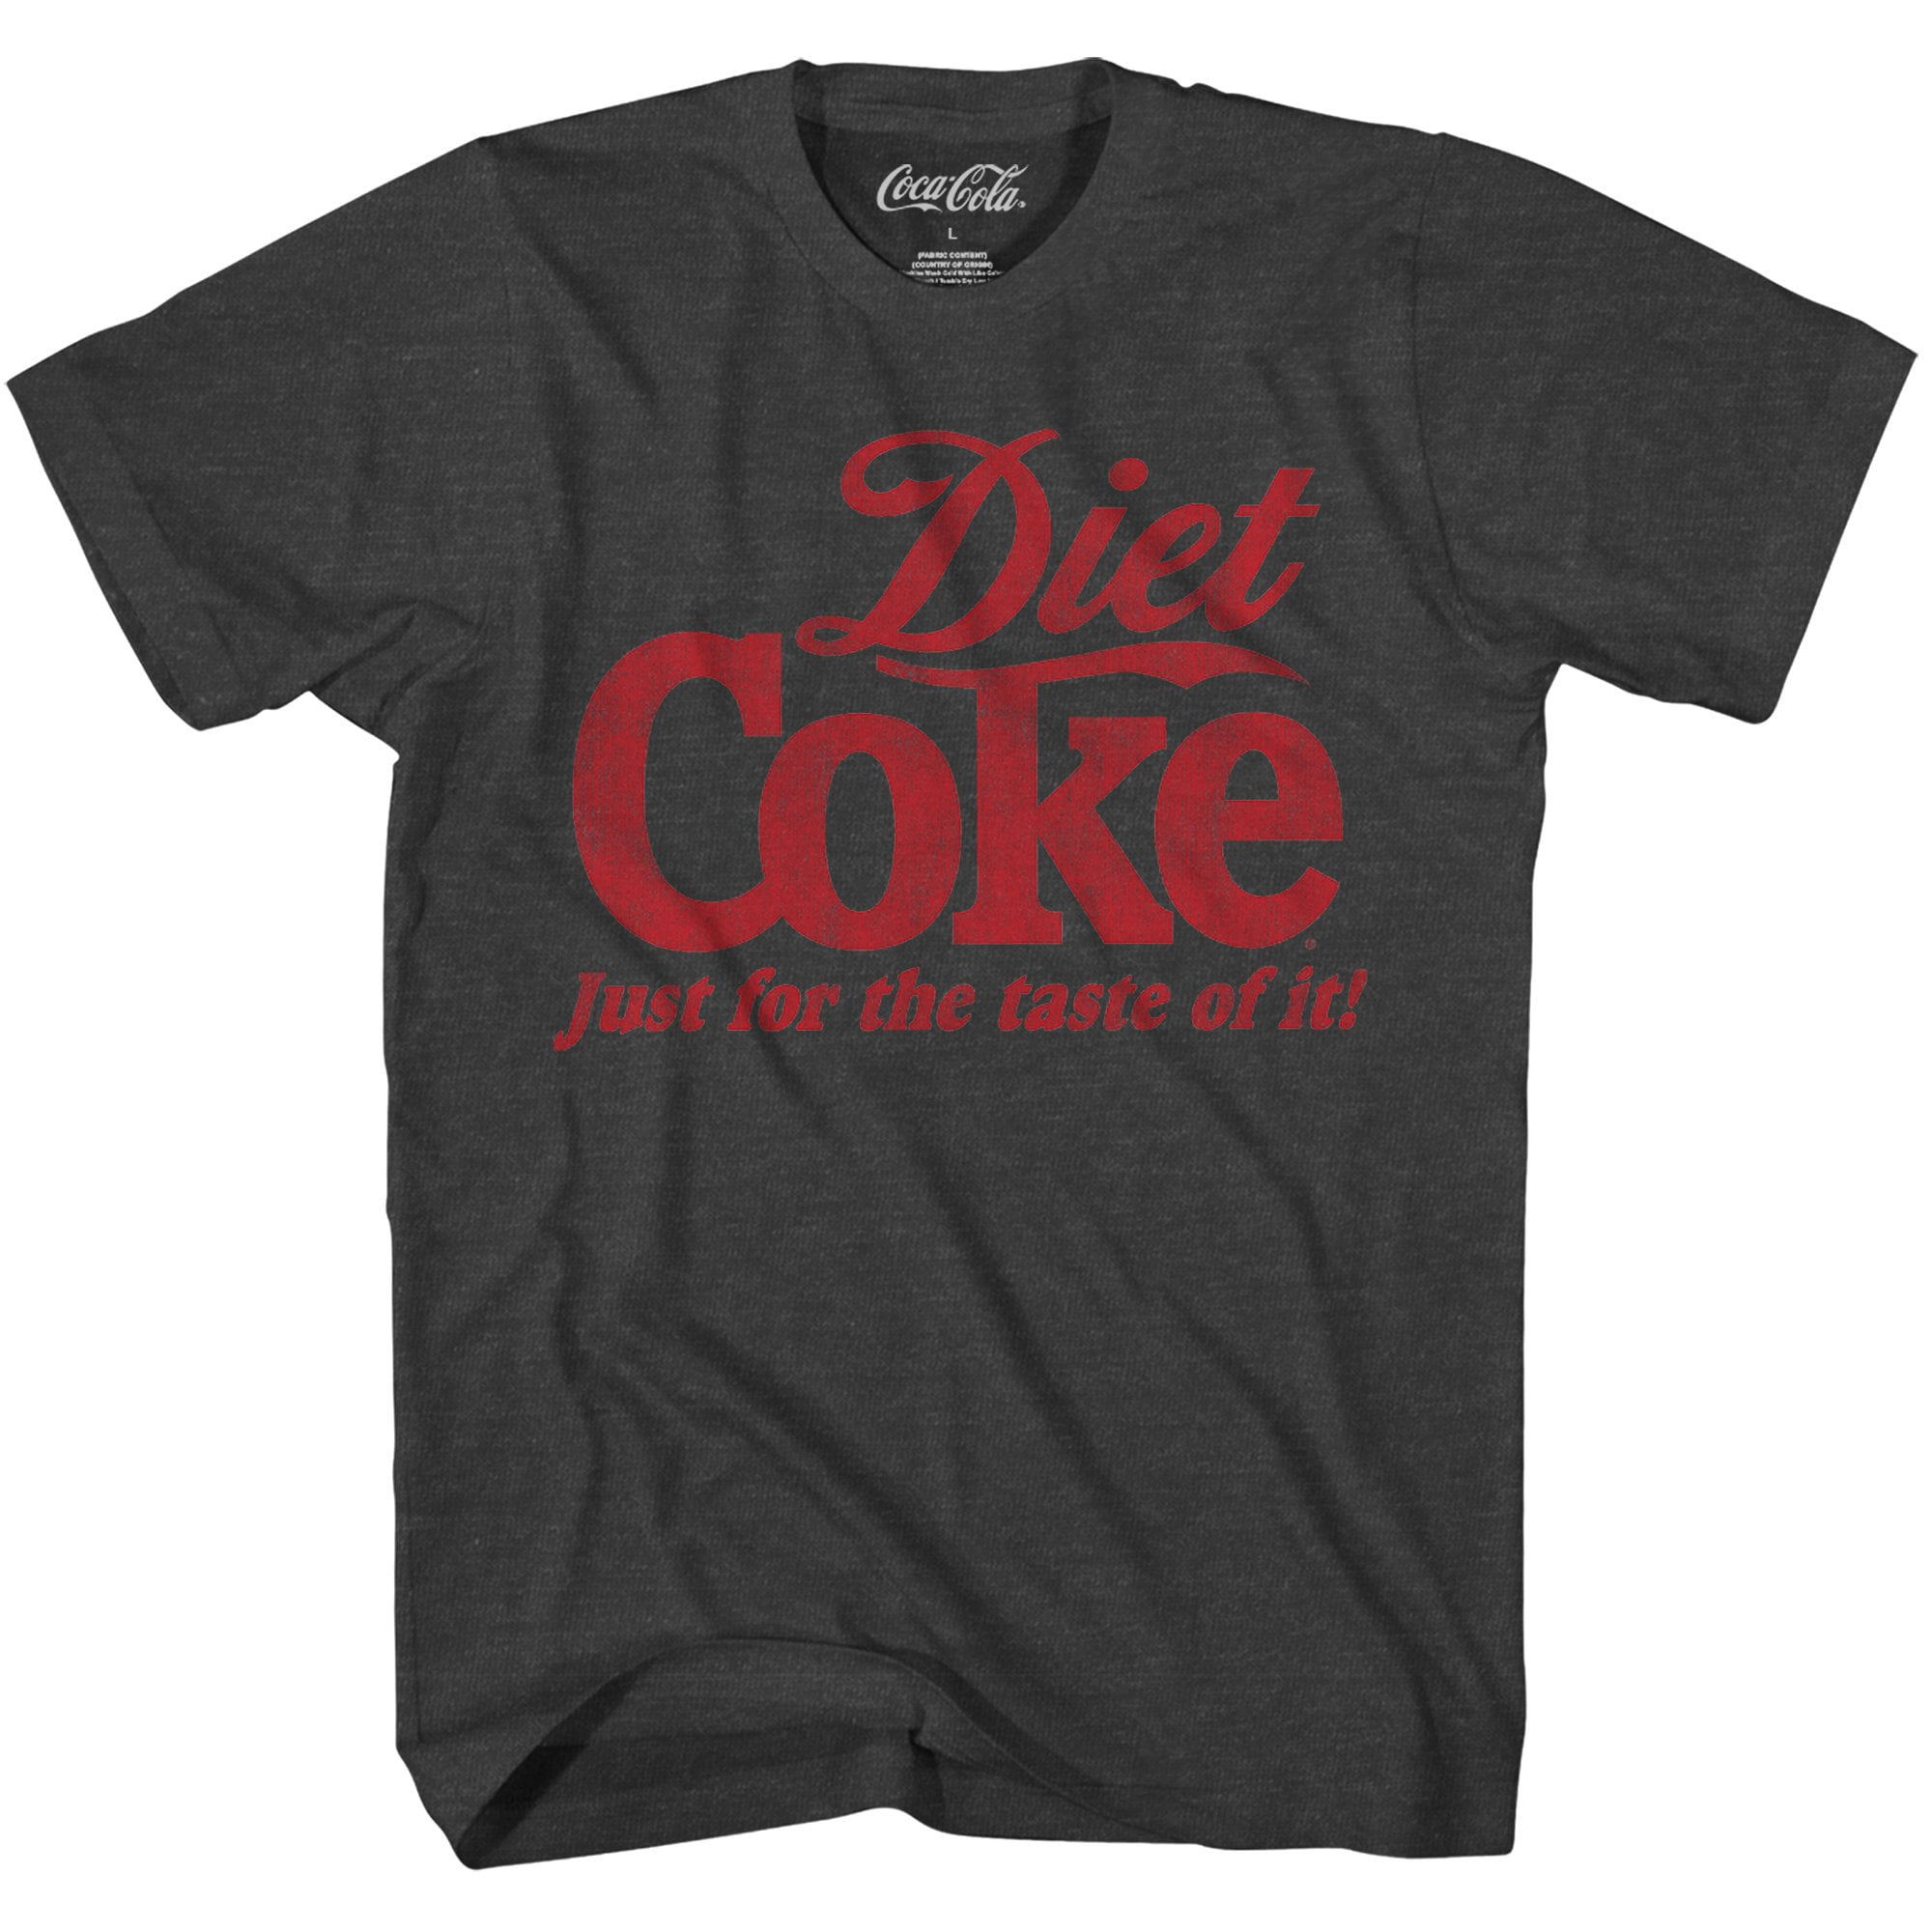 Coca-Cola Black Tee T-shirt Size XL X-Large Things Go Better with Coke 